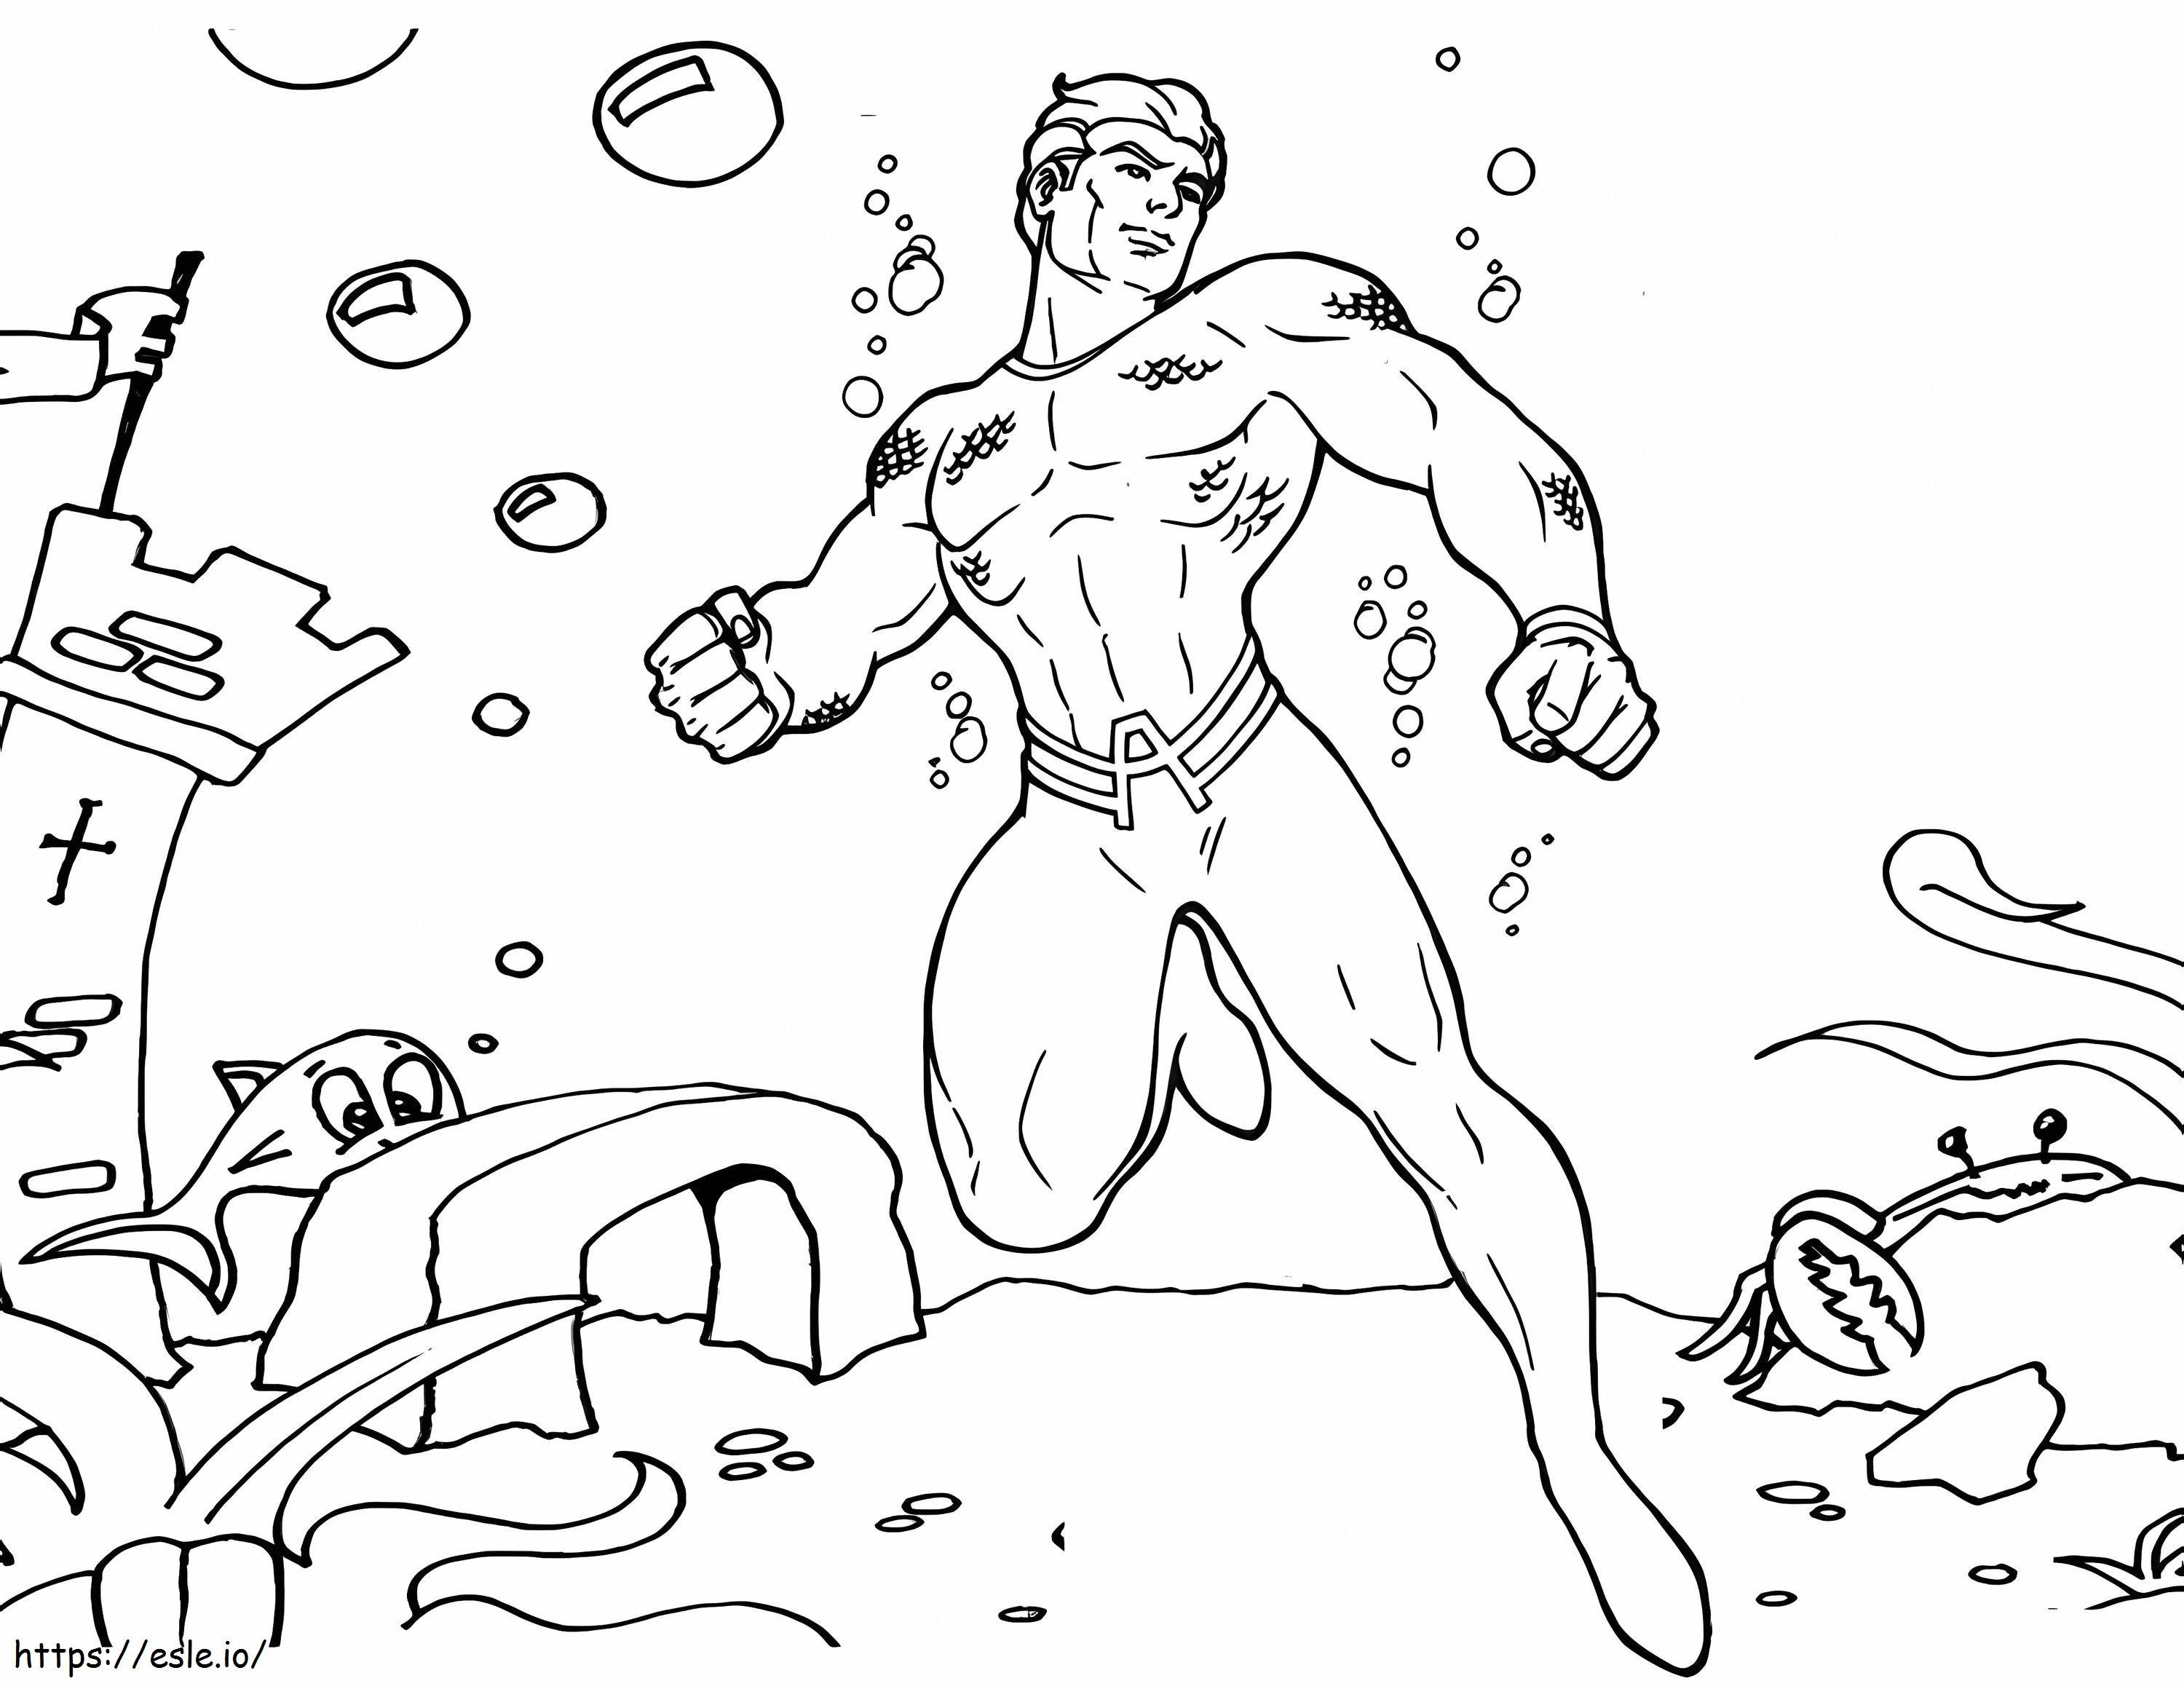 Aquaman In Justice League coloring page